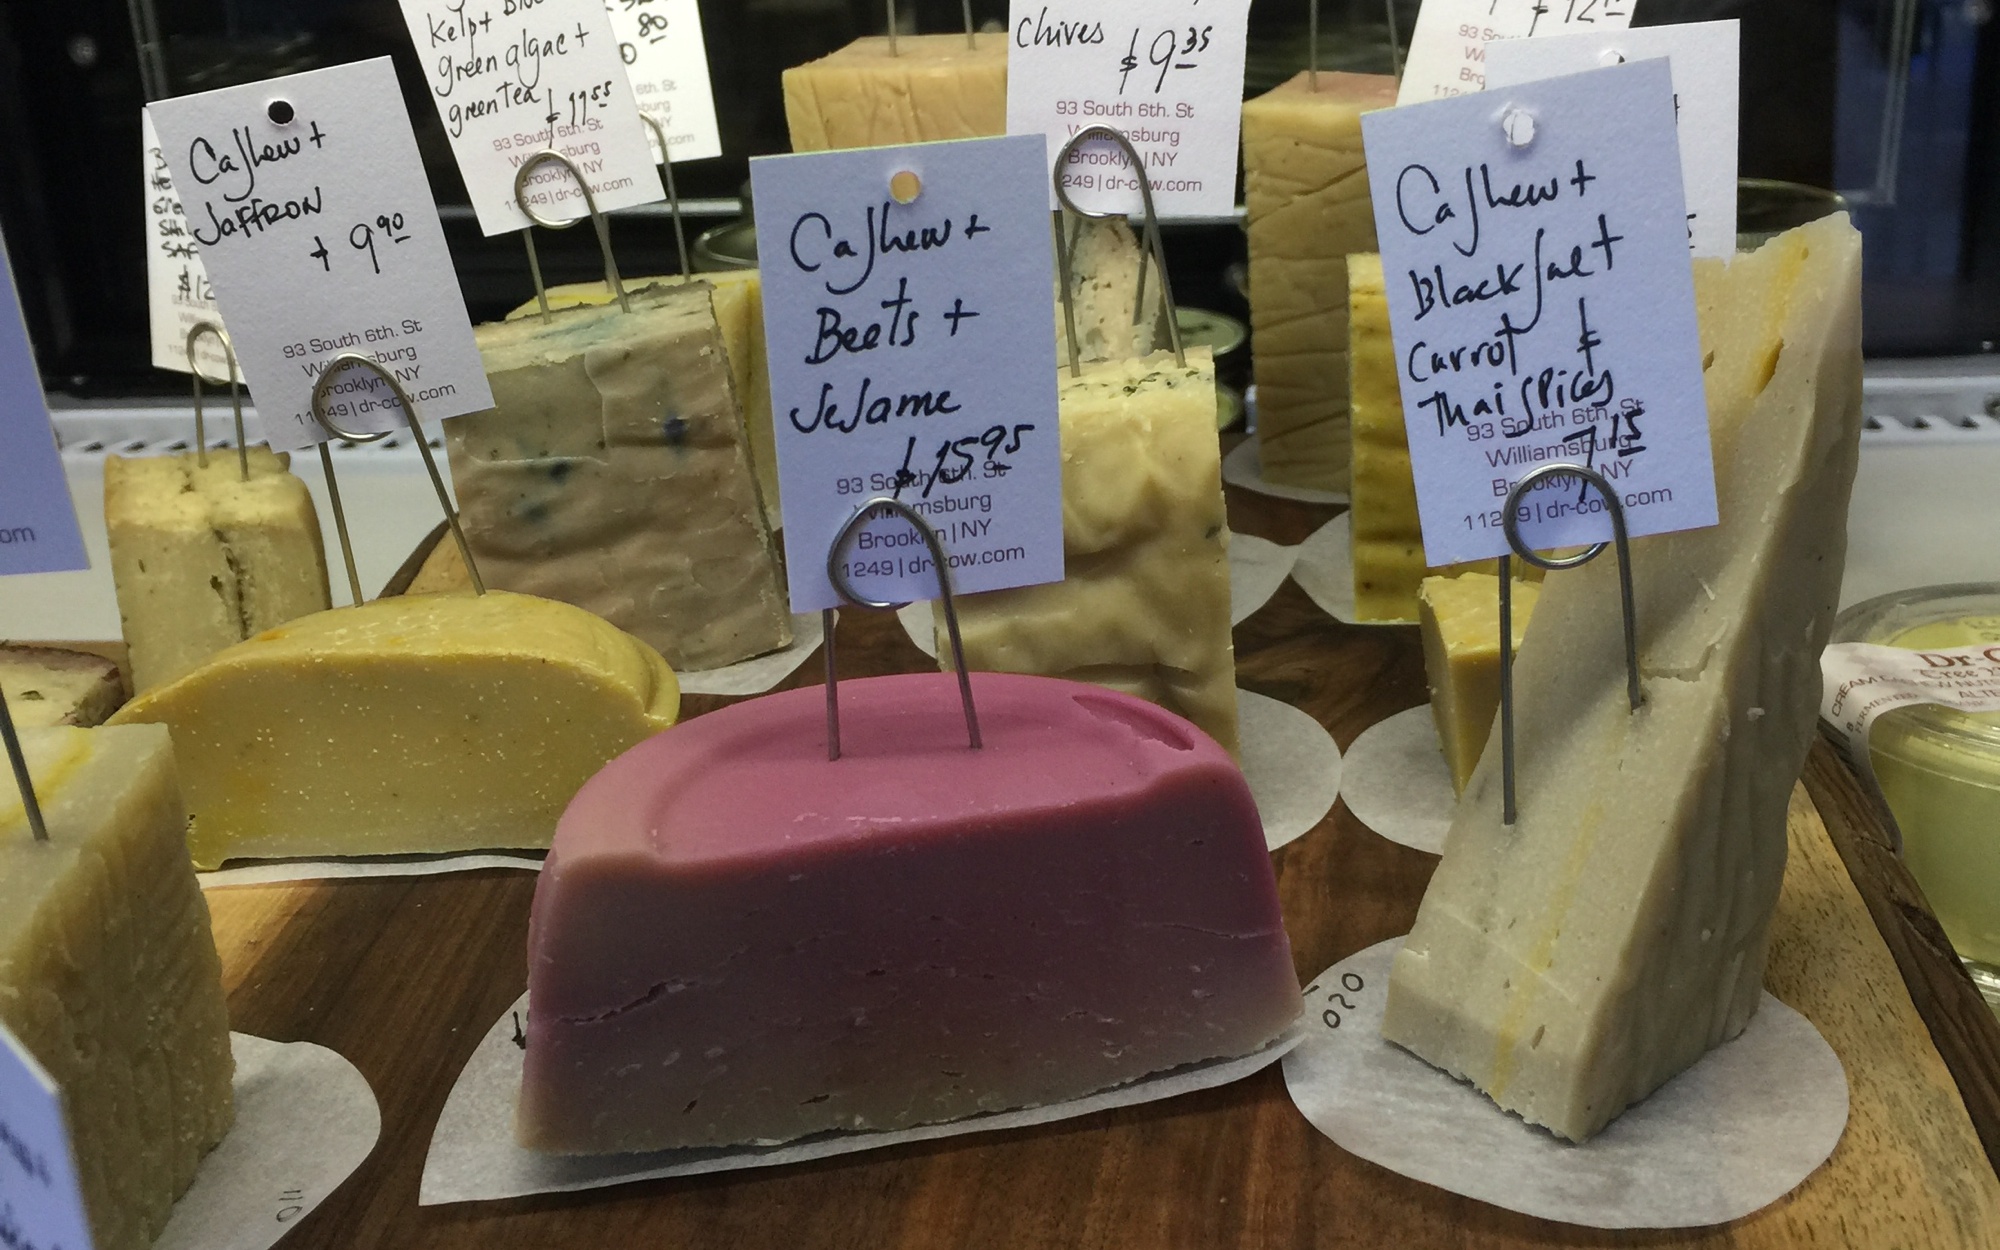 A selection of vegan cheeses from Dr-Cow. Photo by Julie Leibach